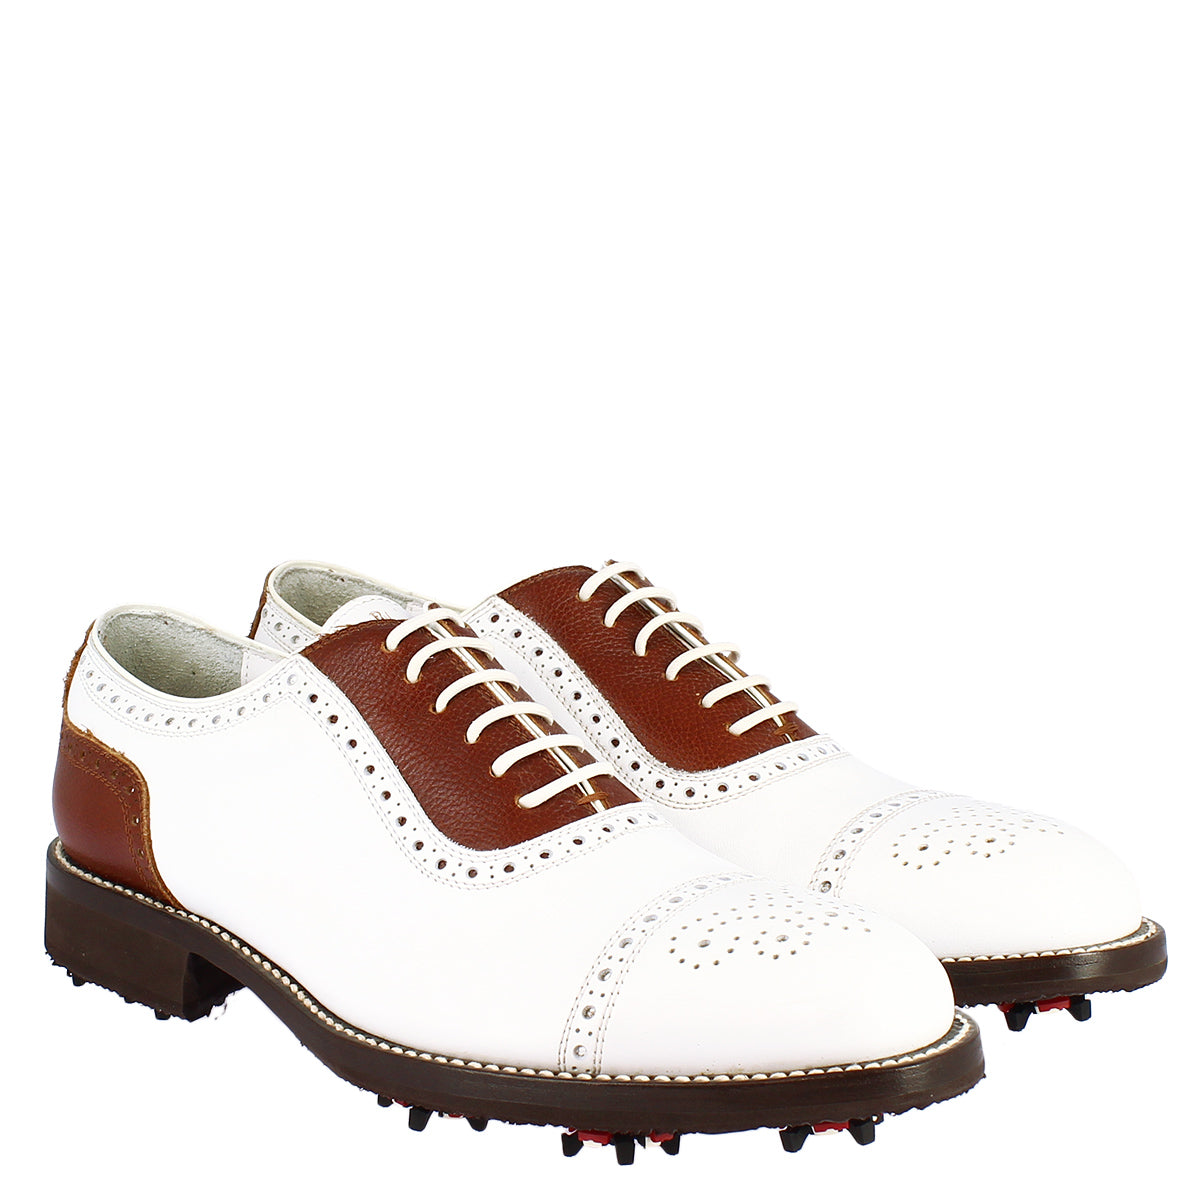 Classic handmade men's golf shoes in brown white calf leather